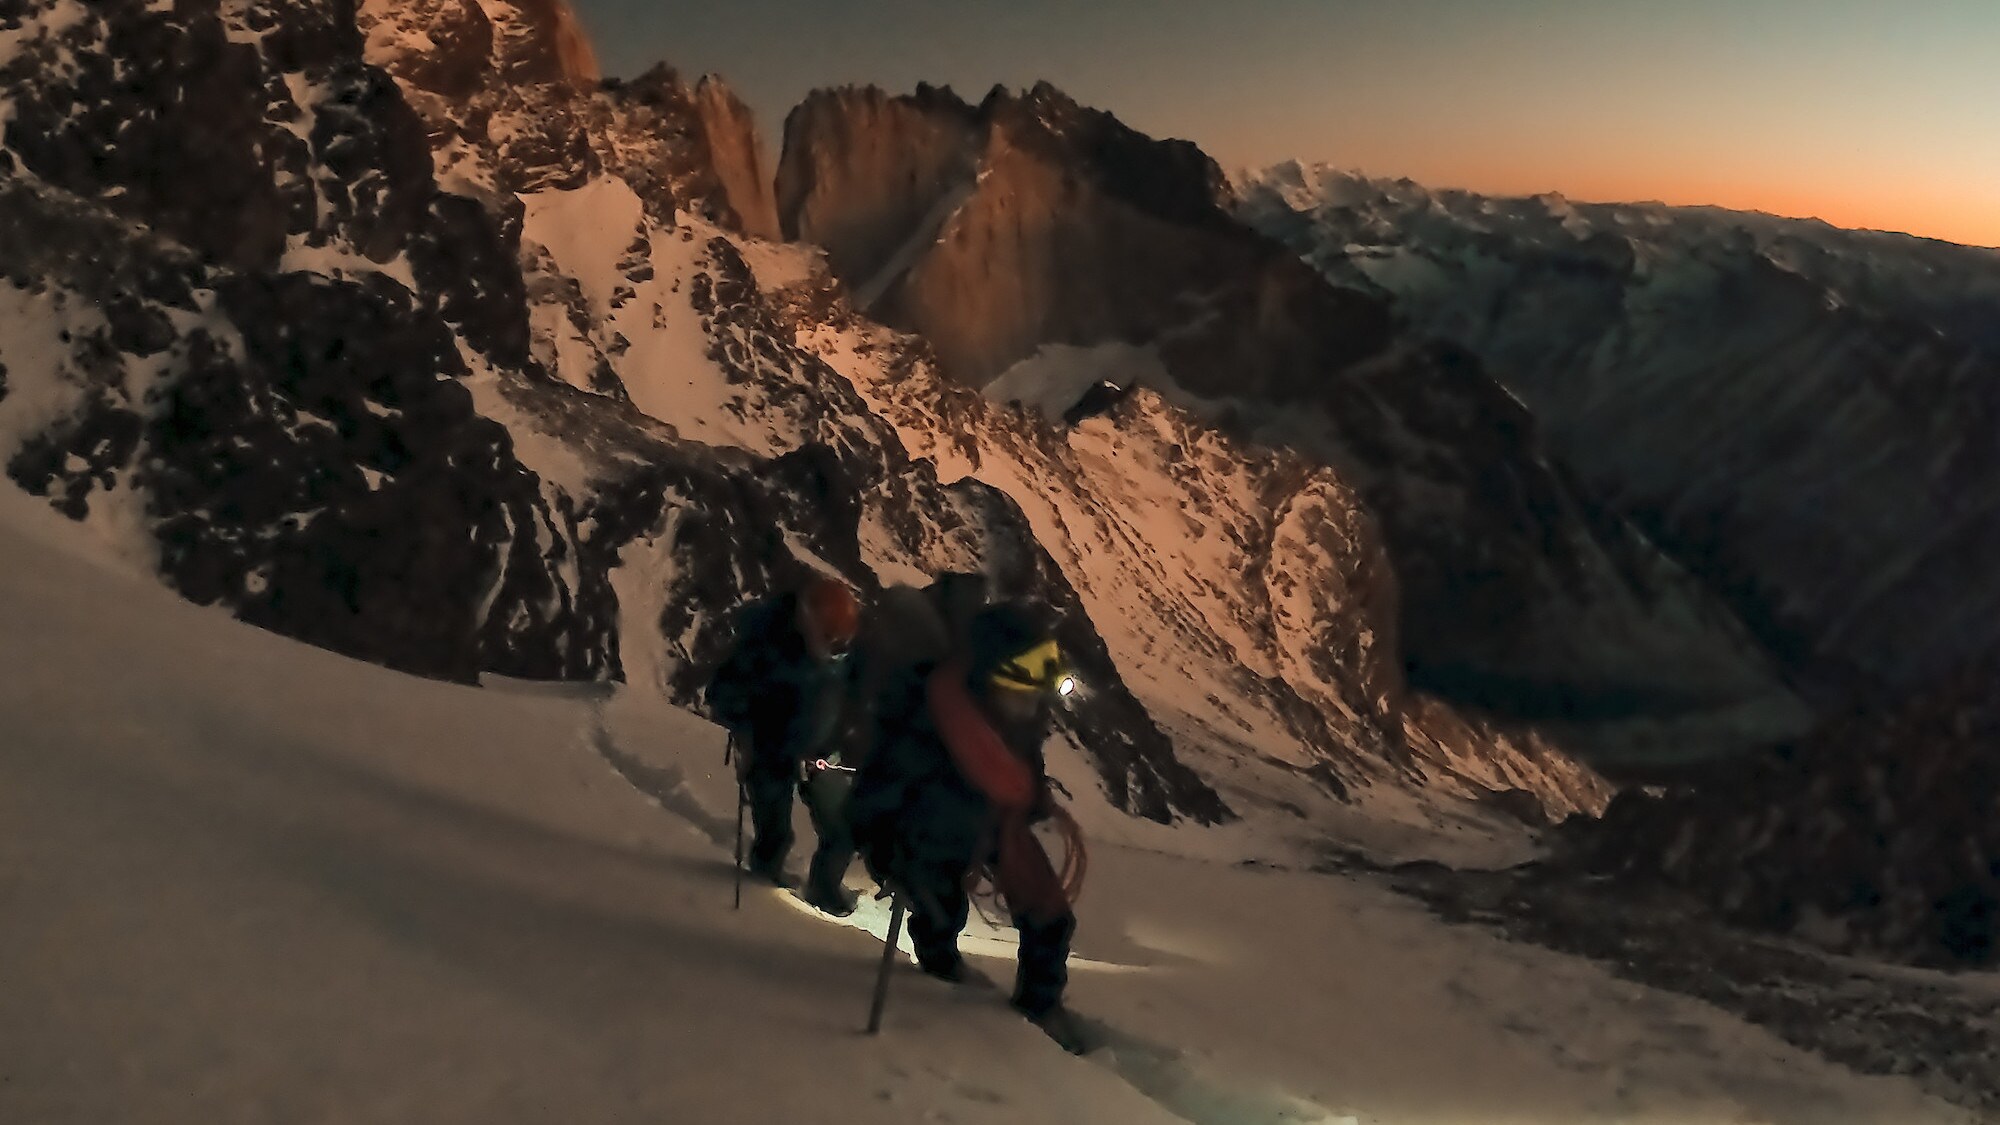 Climbers walking through snow. (National Geographic for Disney+/Bertie Gregory)